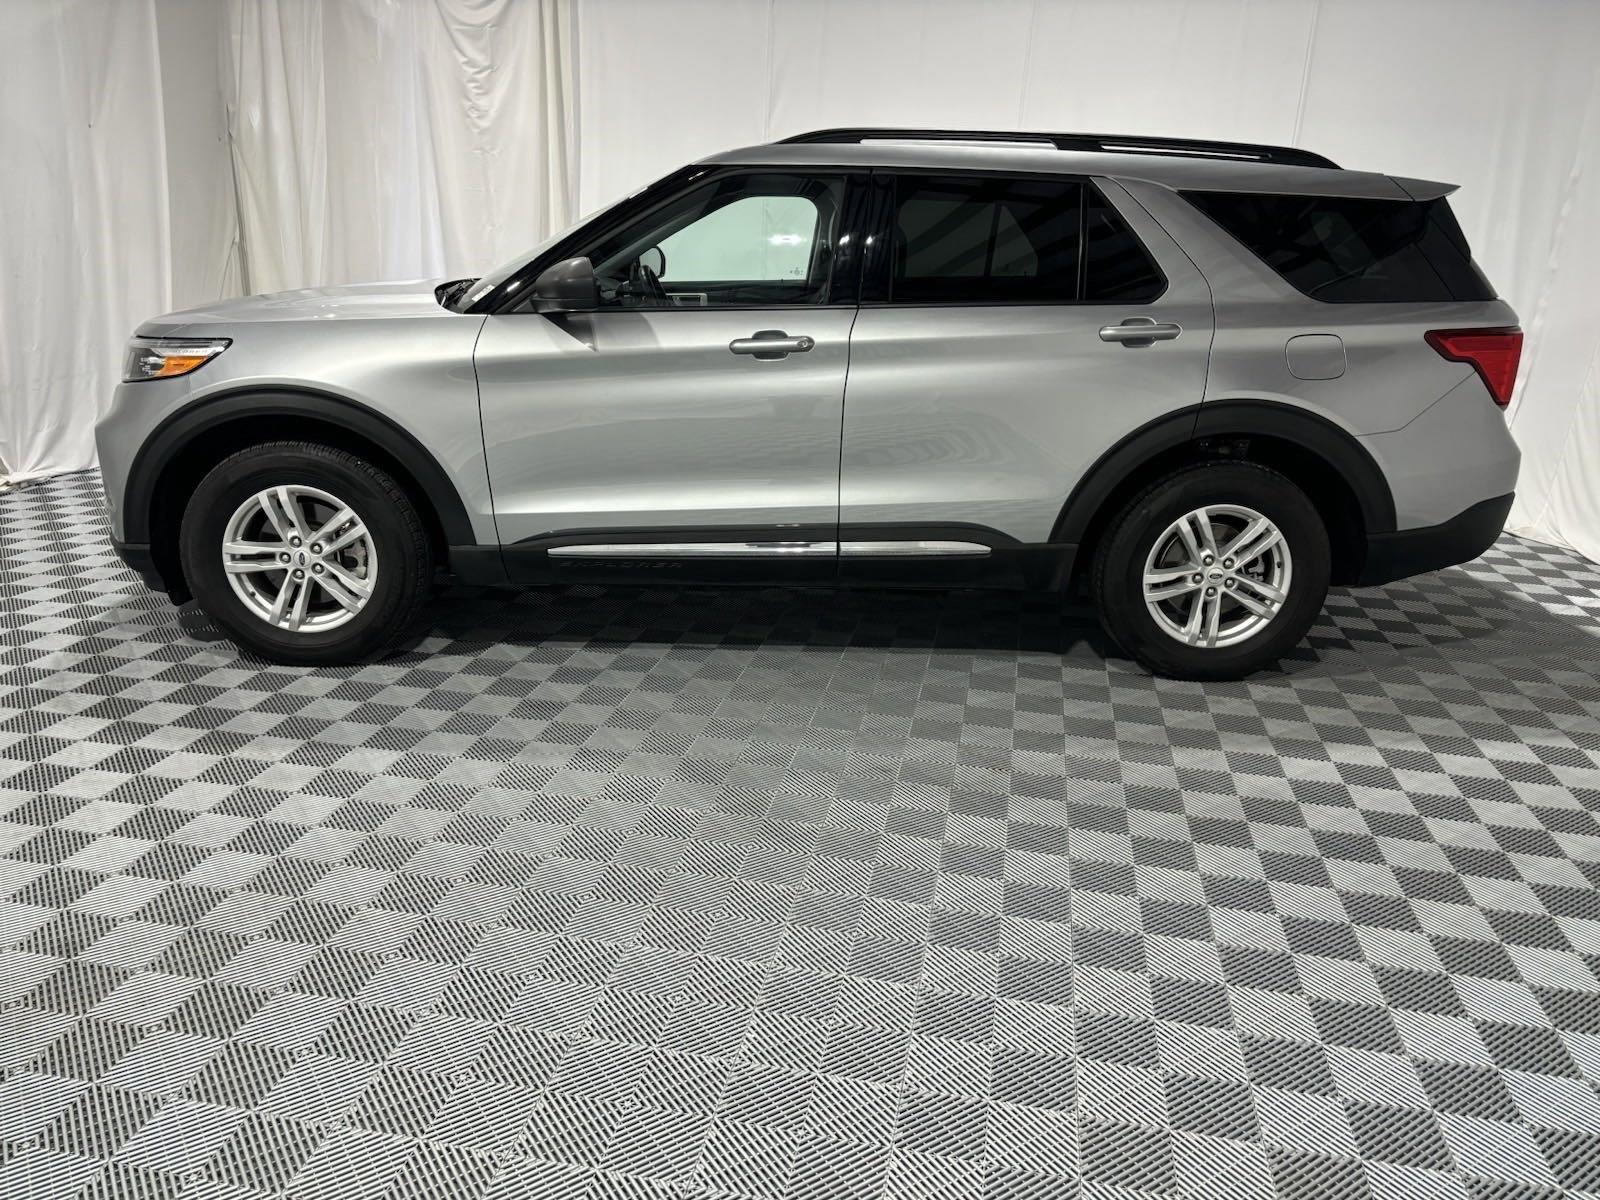 Used 2021 Ford Explorer XLT SUV for sale in St Joseph MO